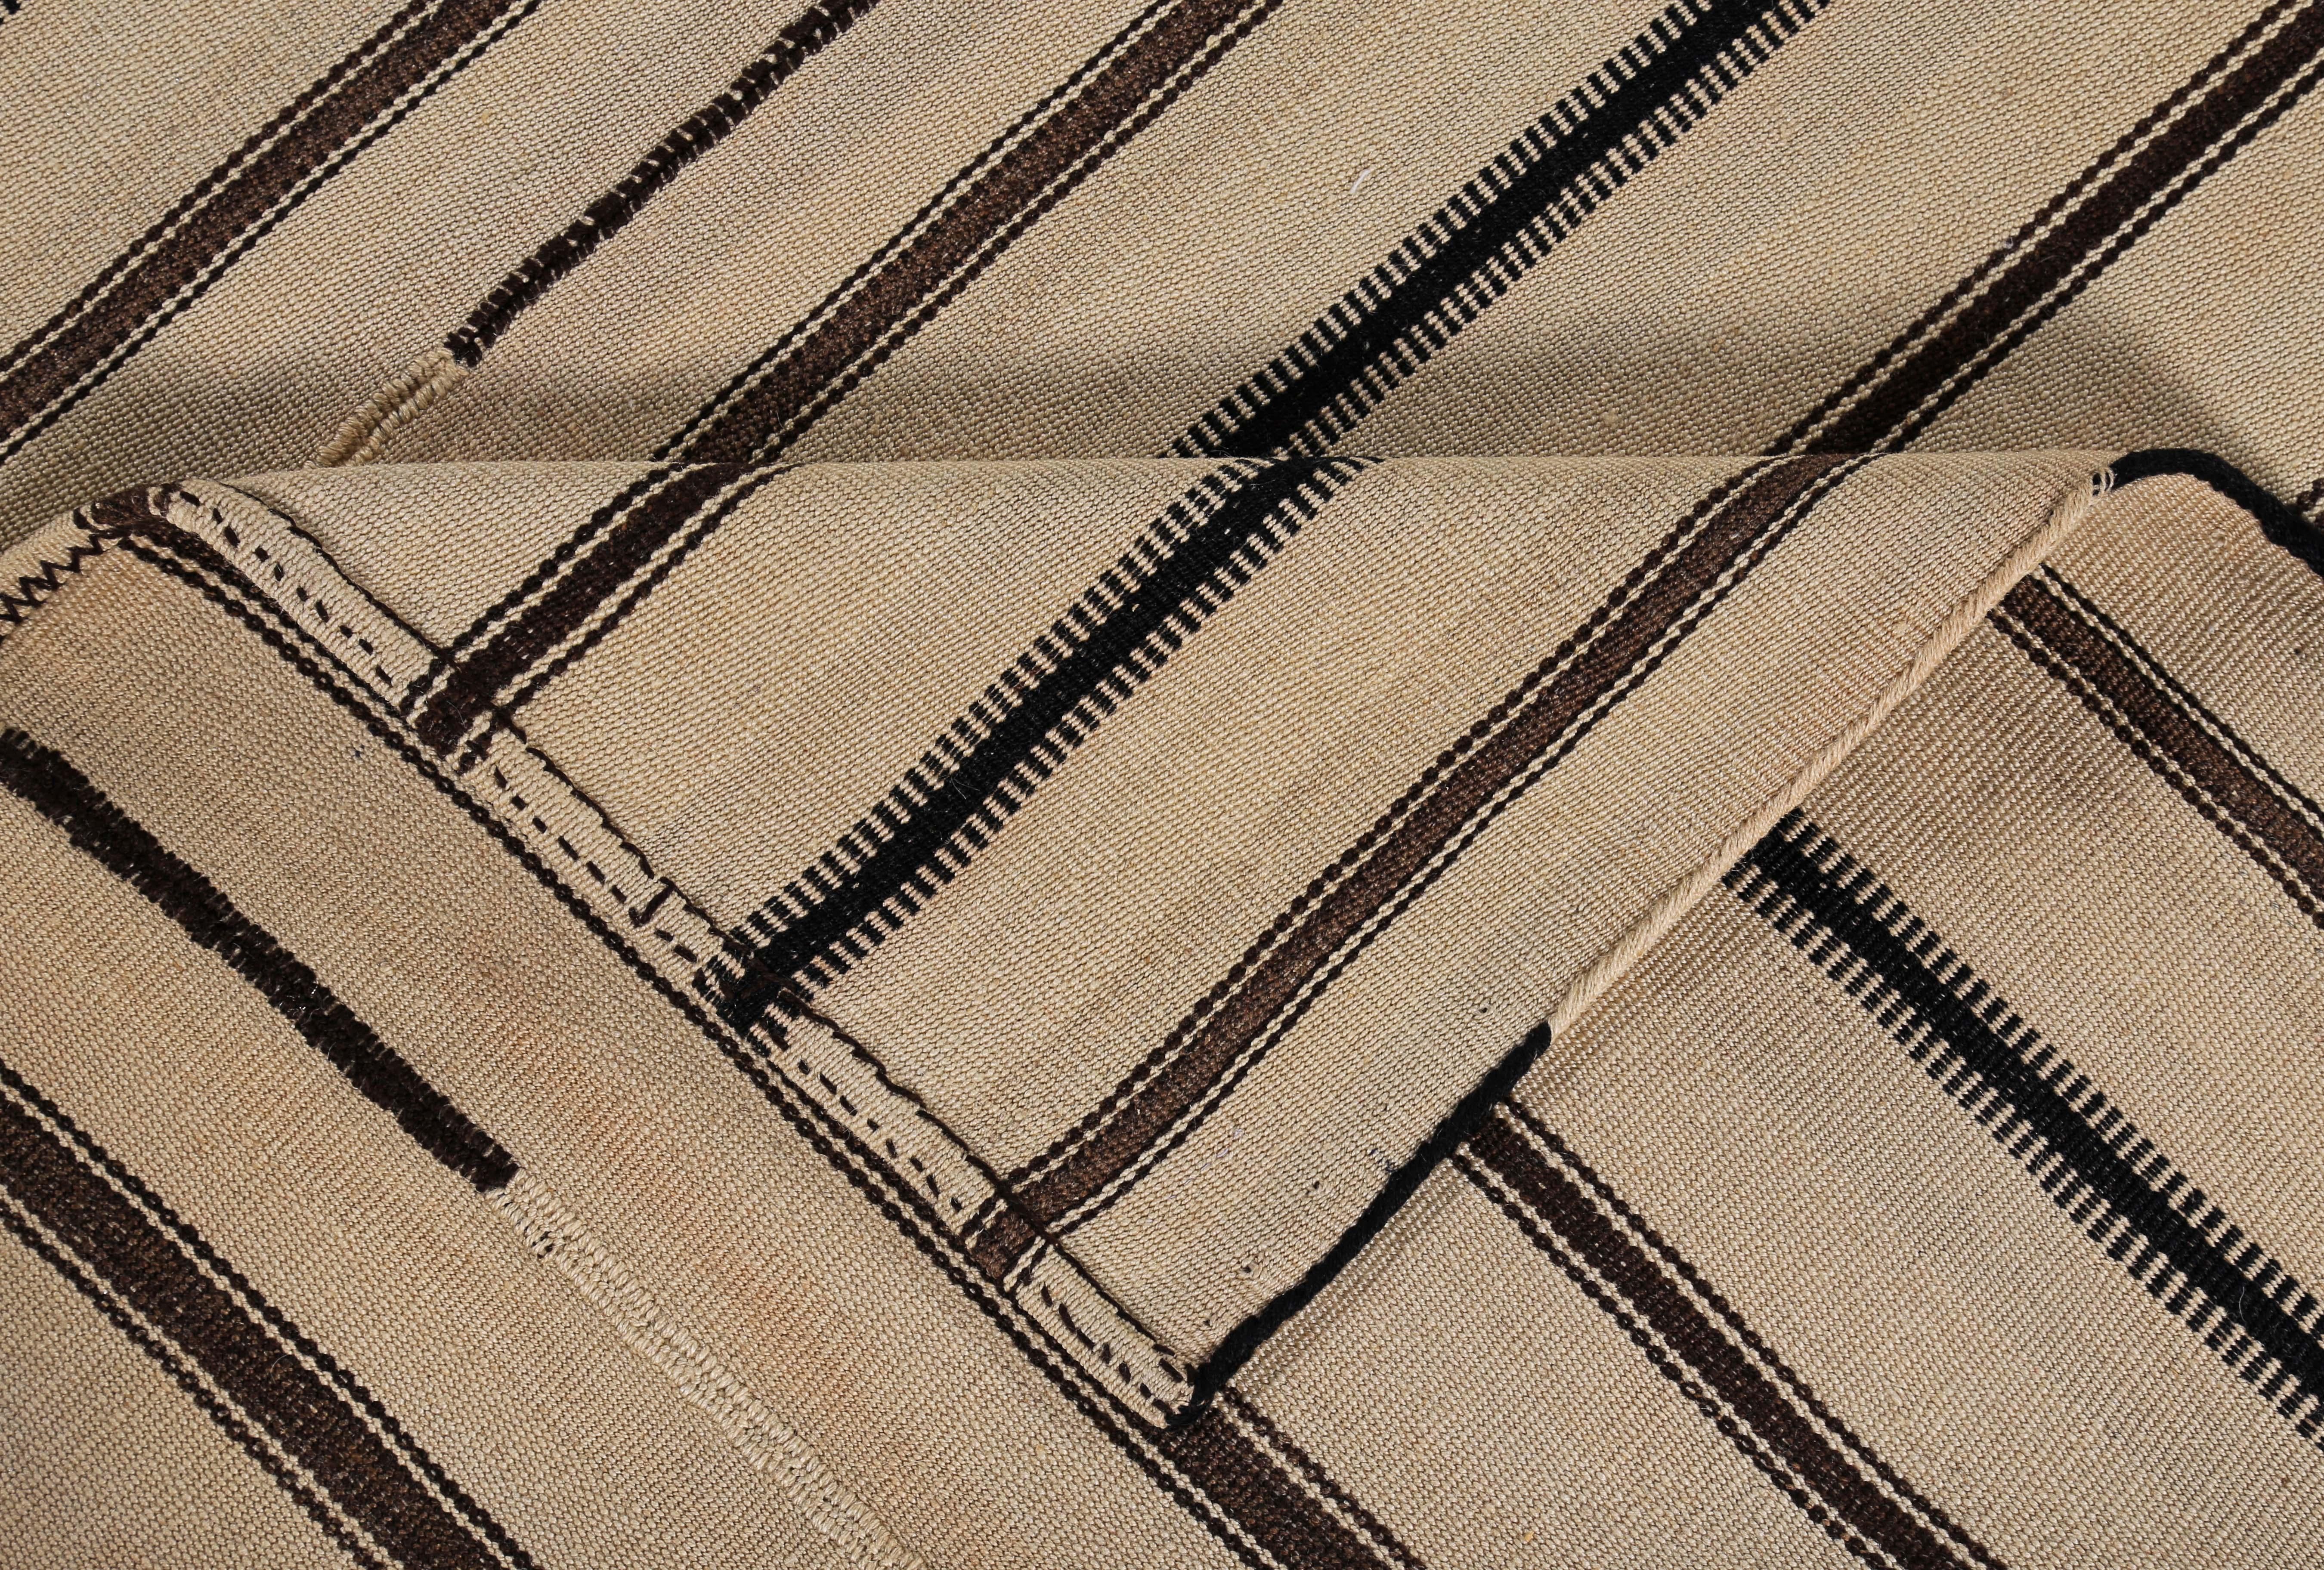 Wool Modern Turkish Kilim Rug with Black and Brown Pencil Stripes in a Beige Field For Sale